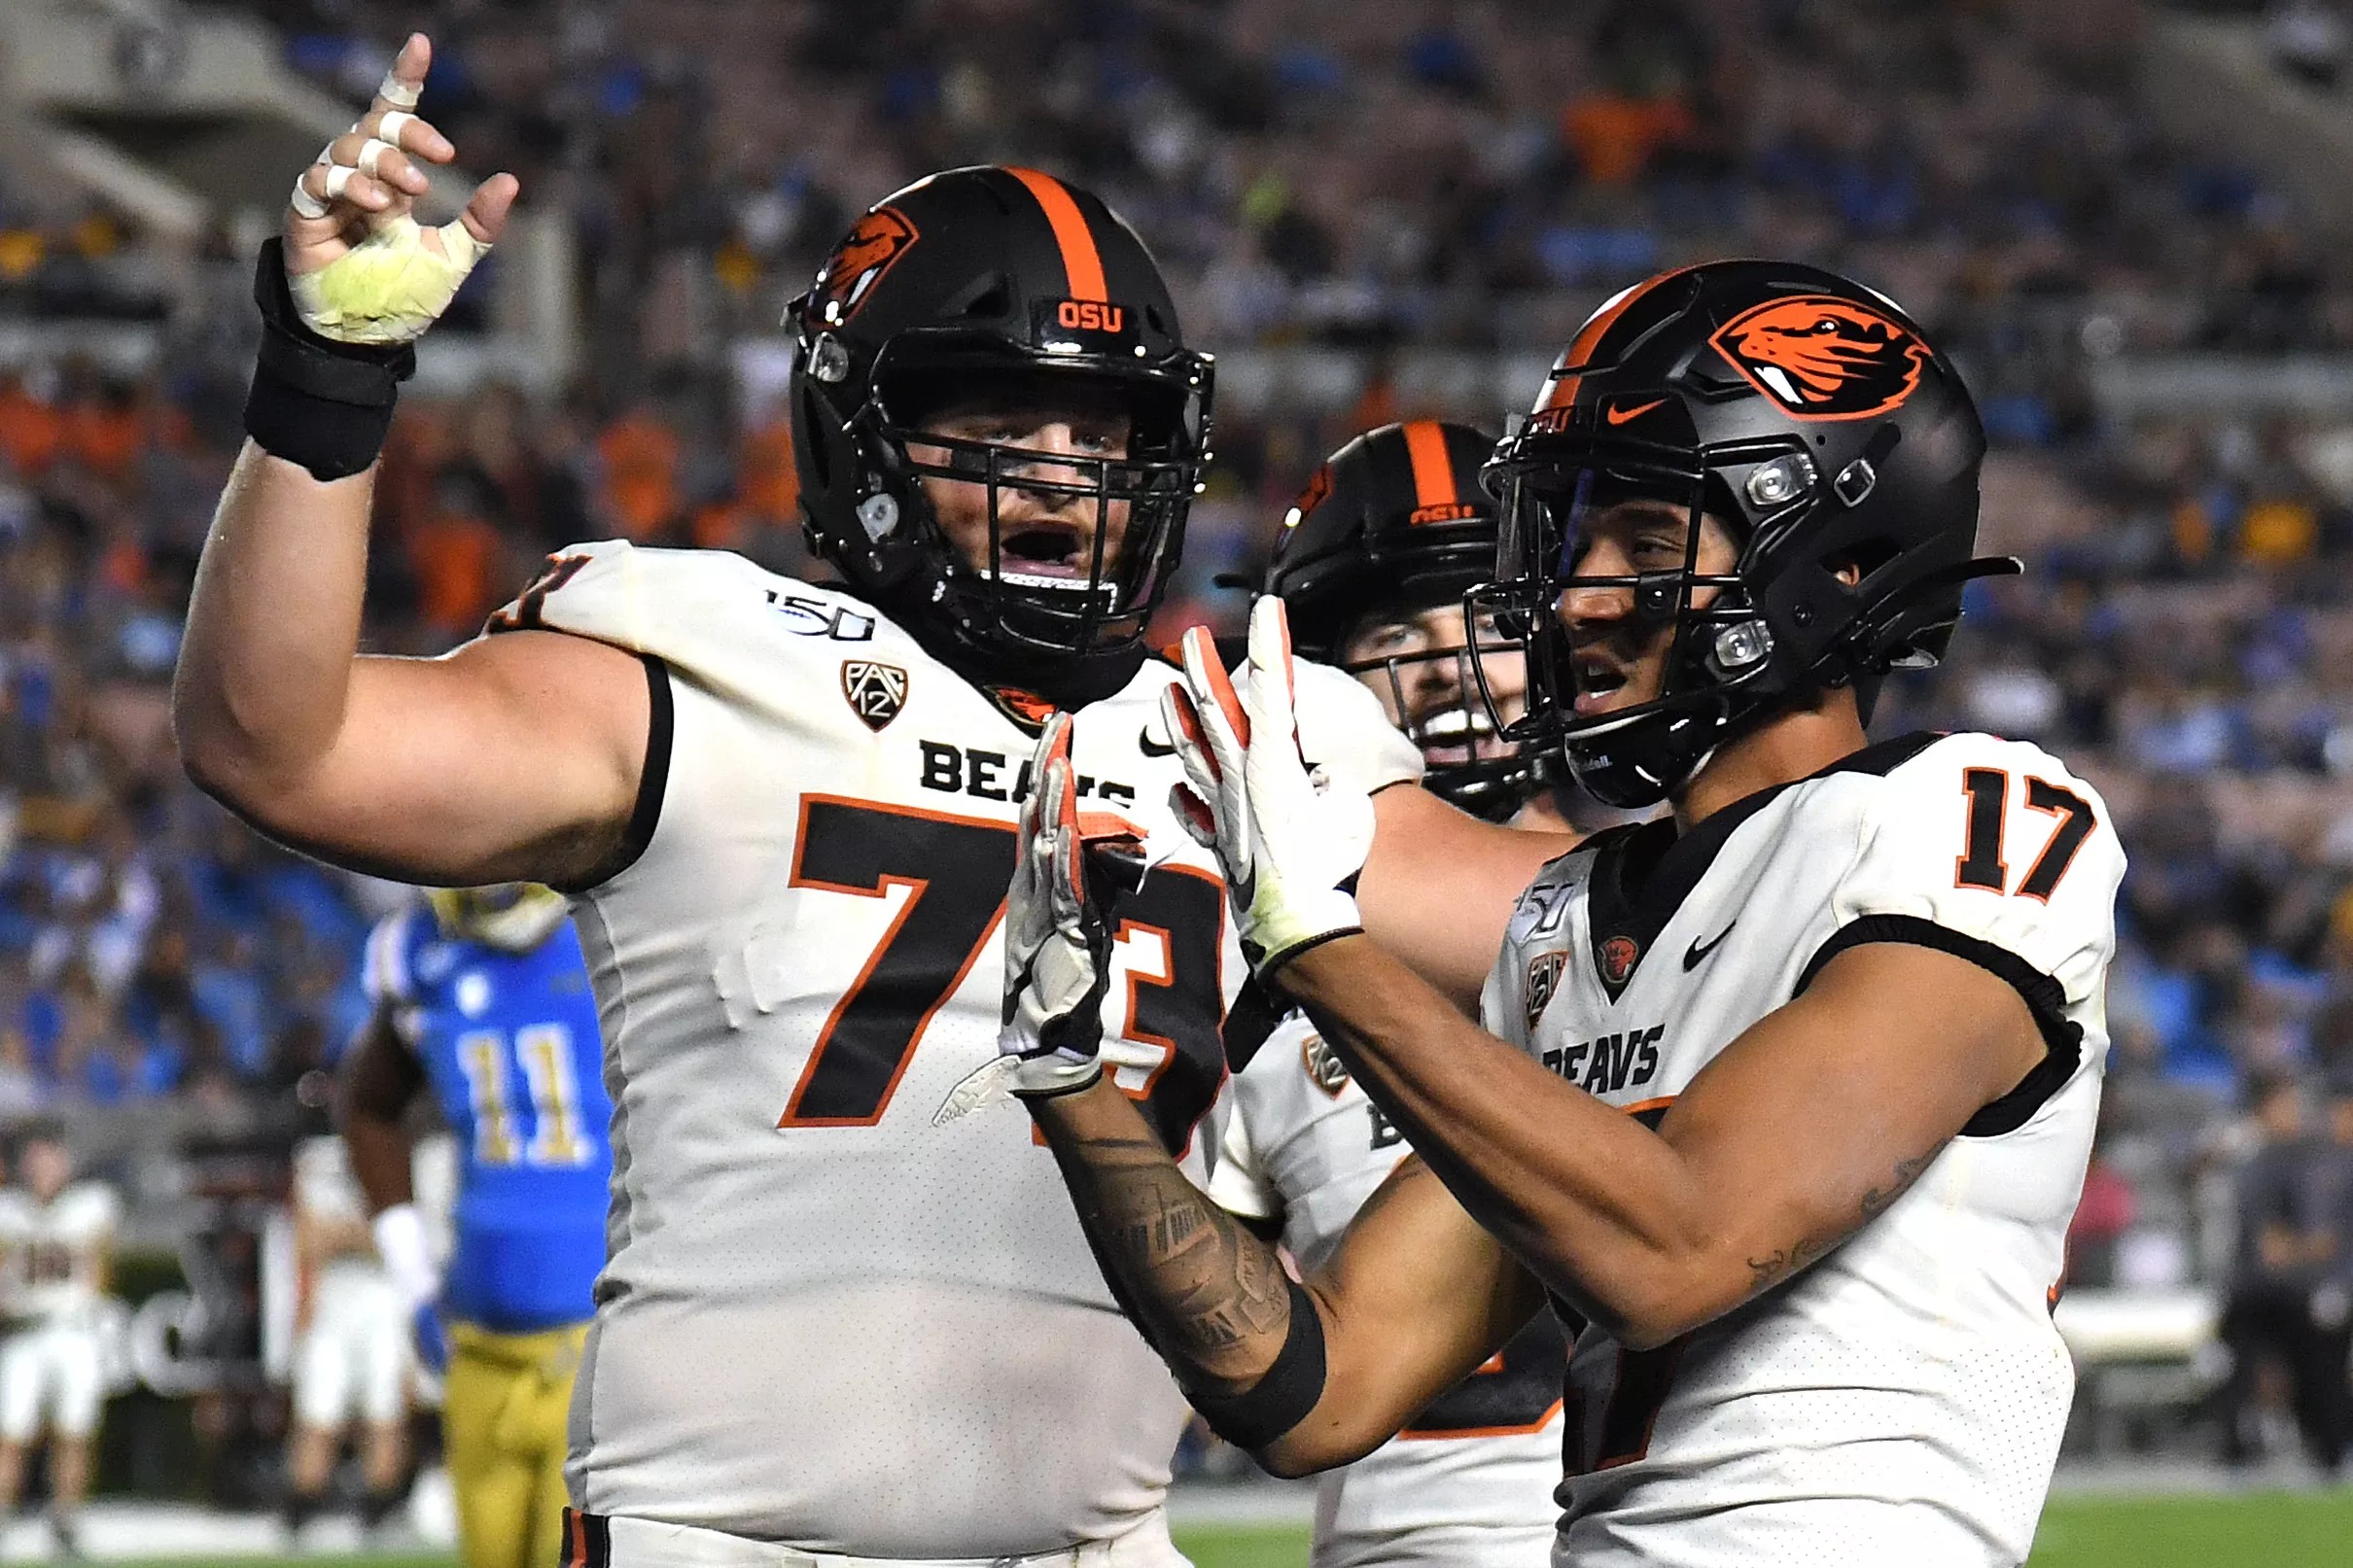 Oregon State Football: The Big Question